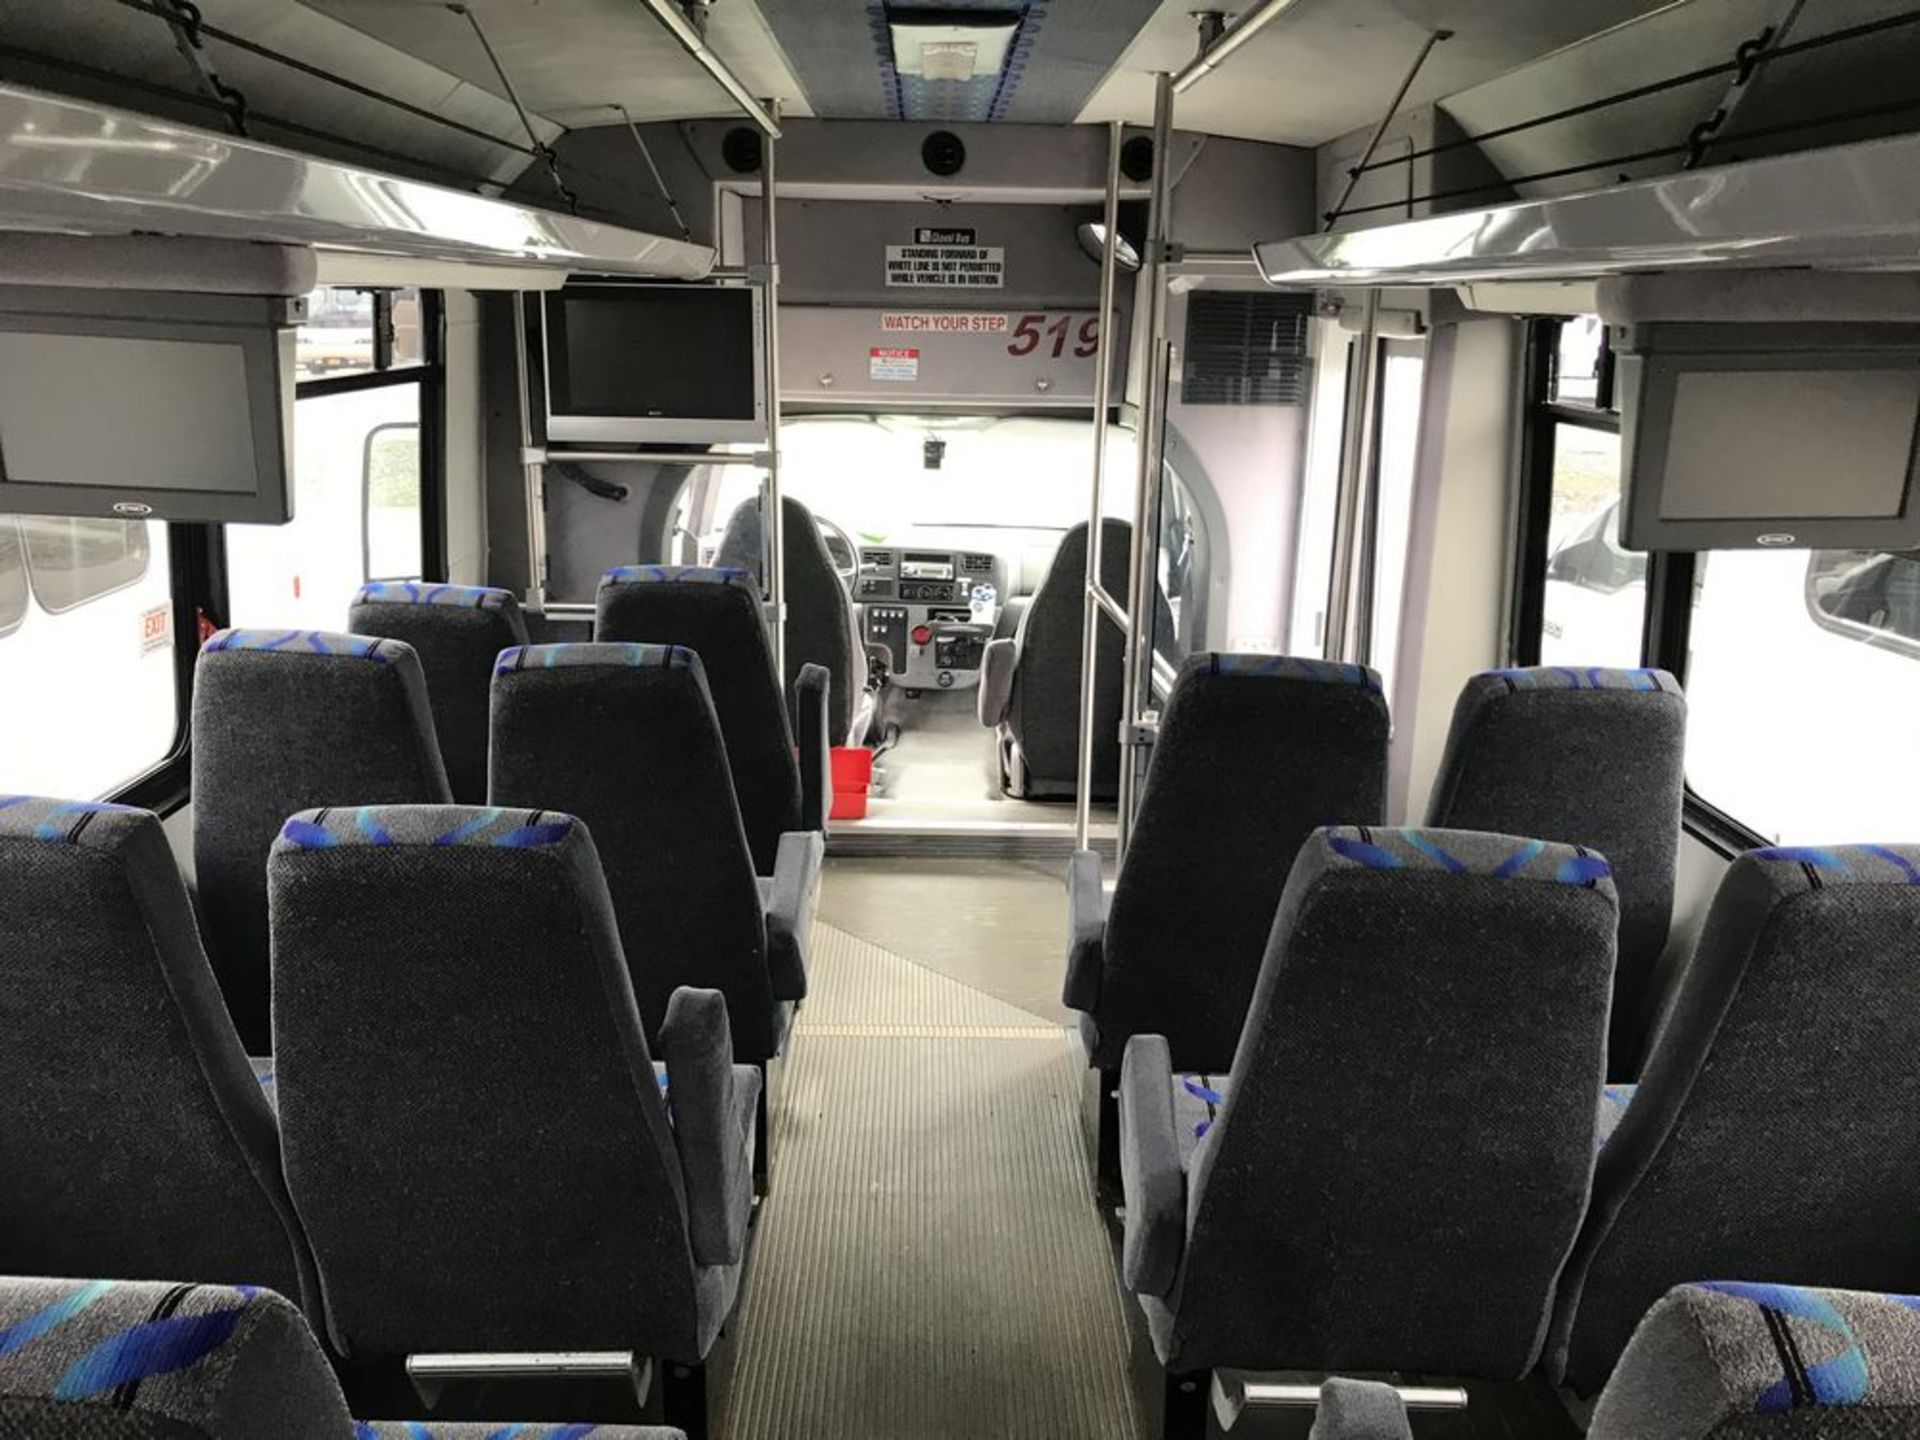 2009 FORD MODEL F650, 38 SEAT PASSENGER COACH BUS - Image 9 of 11